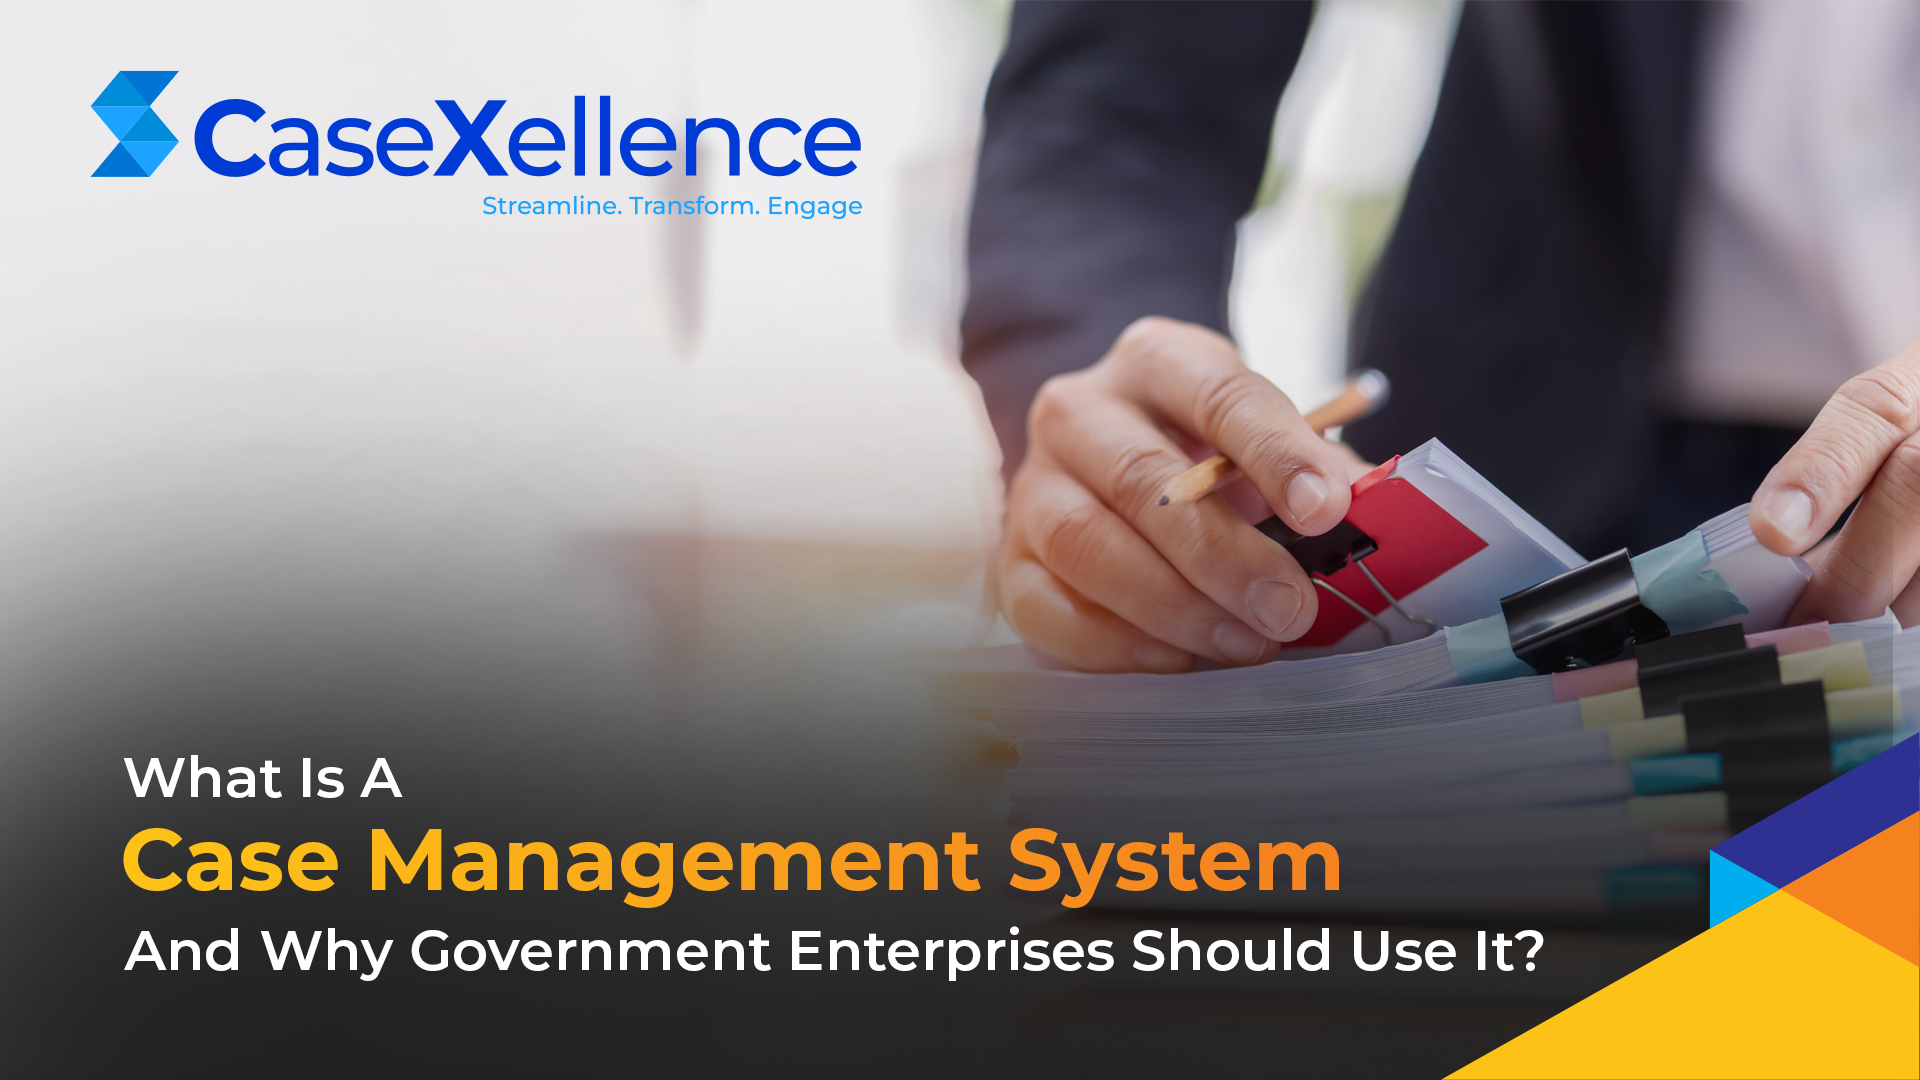 What Is A Case Management System And Why Government Enterprises Should Use It?